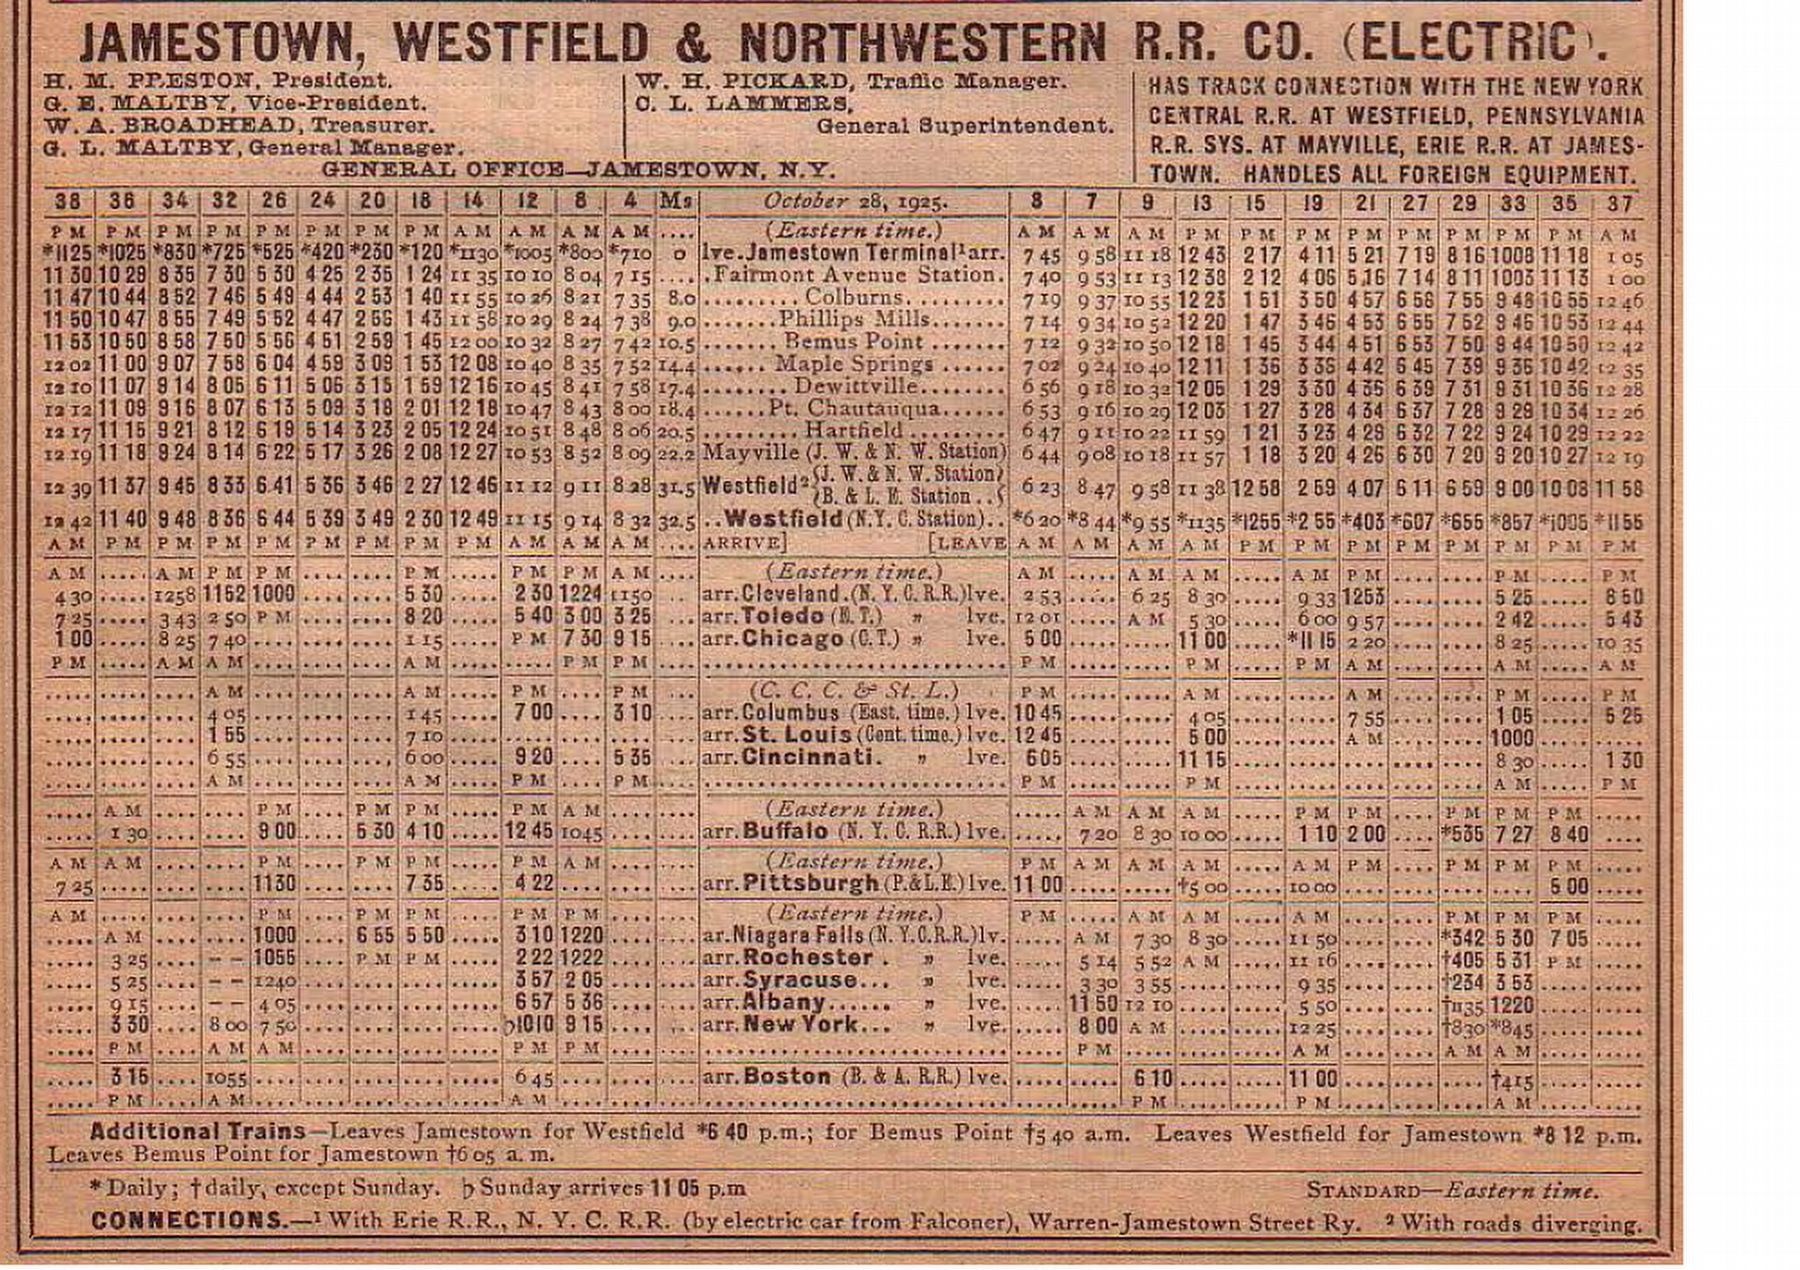 Jamestown, Westfield & Northwestern R.R. Co. Timetable, Dec 1925 image. Click for full size.